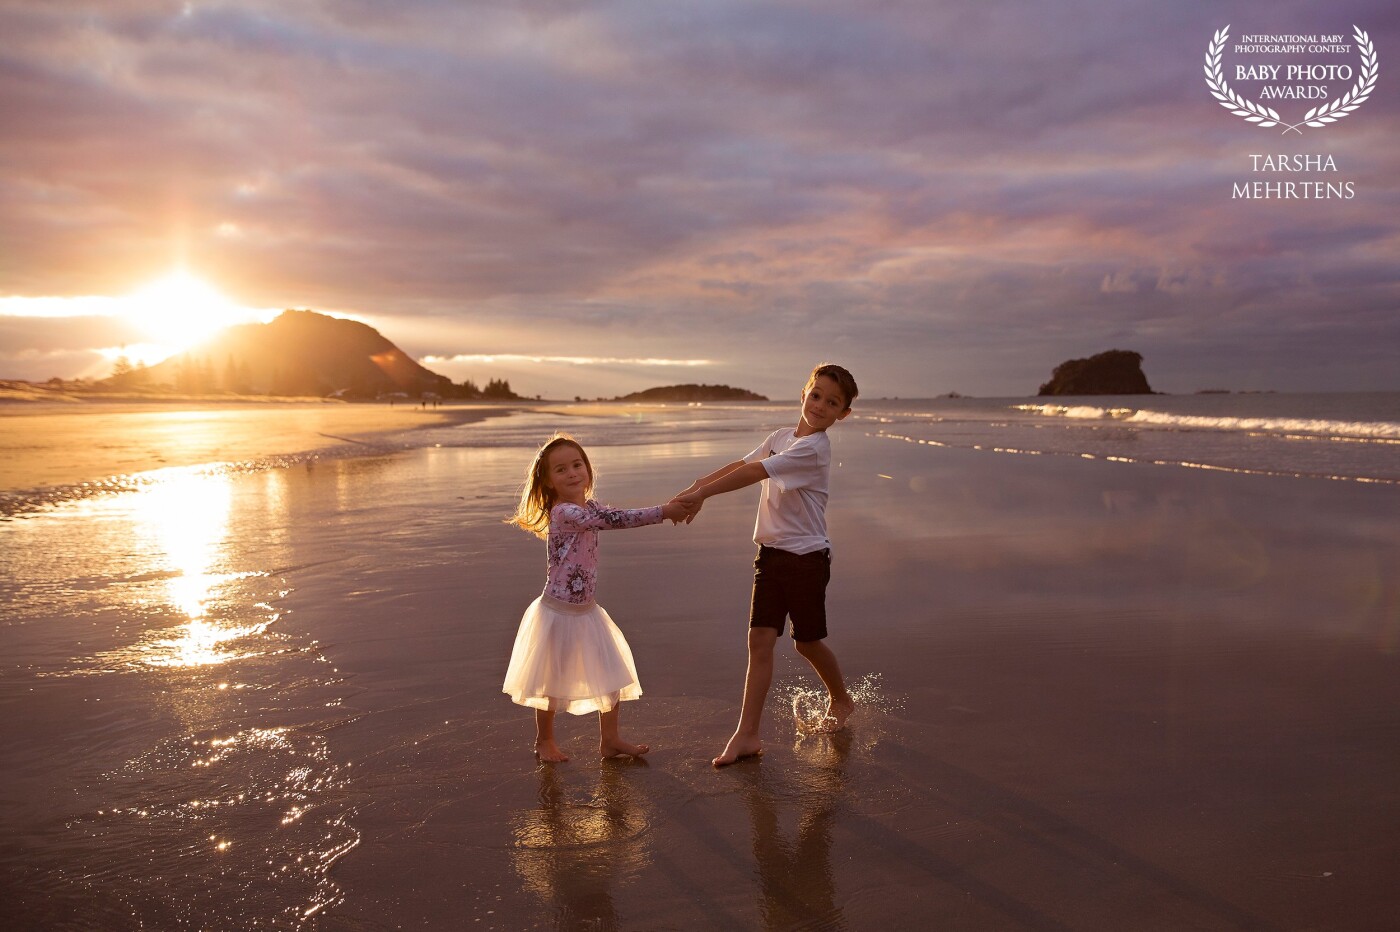 An amazing sunset at Mount Maunganui Beach, New Zealand made for a beautiful image of this brother and sister enjoying the last rays of the day.